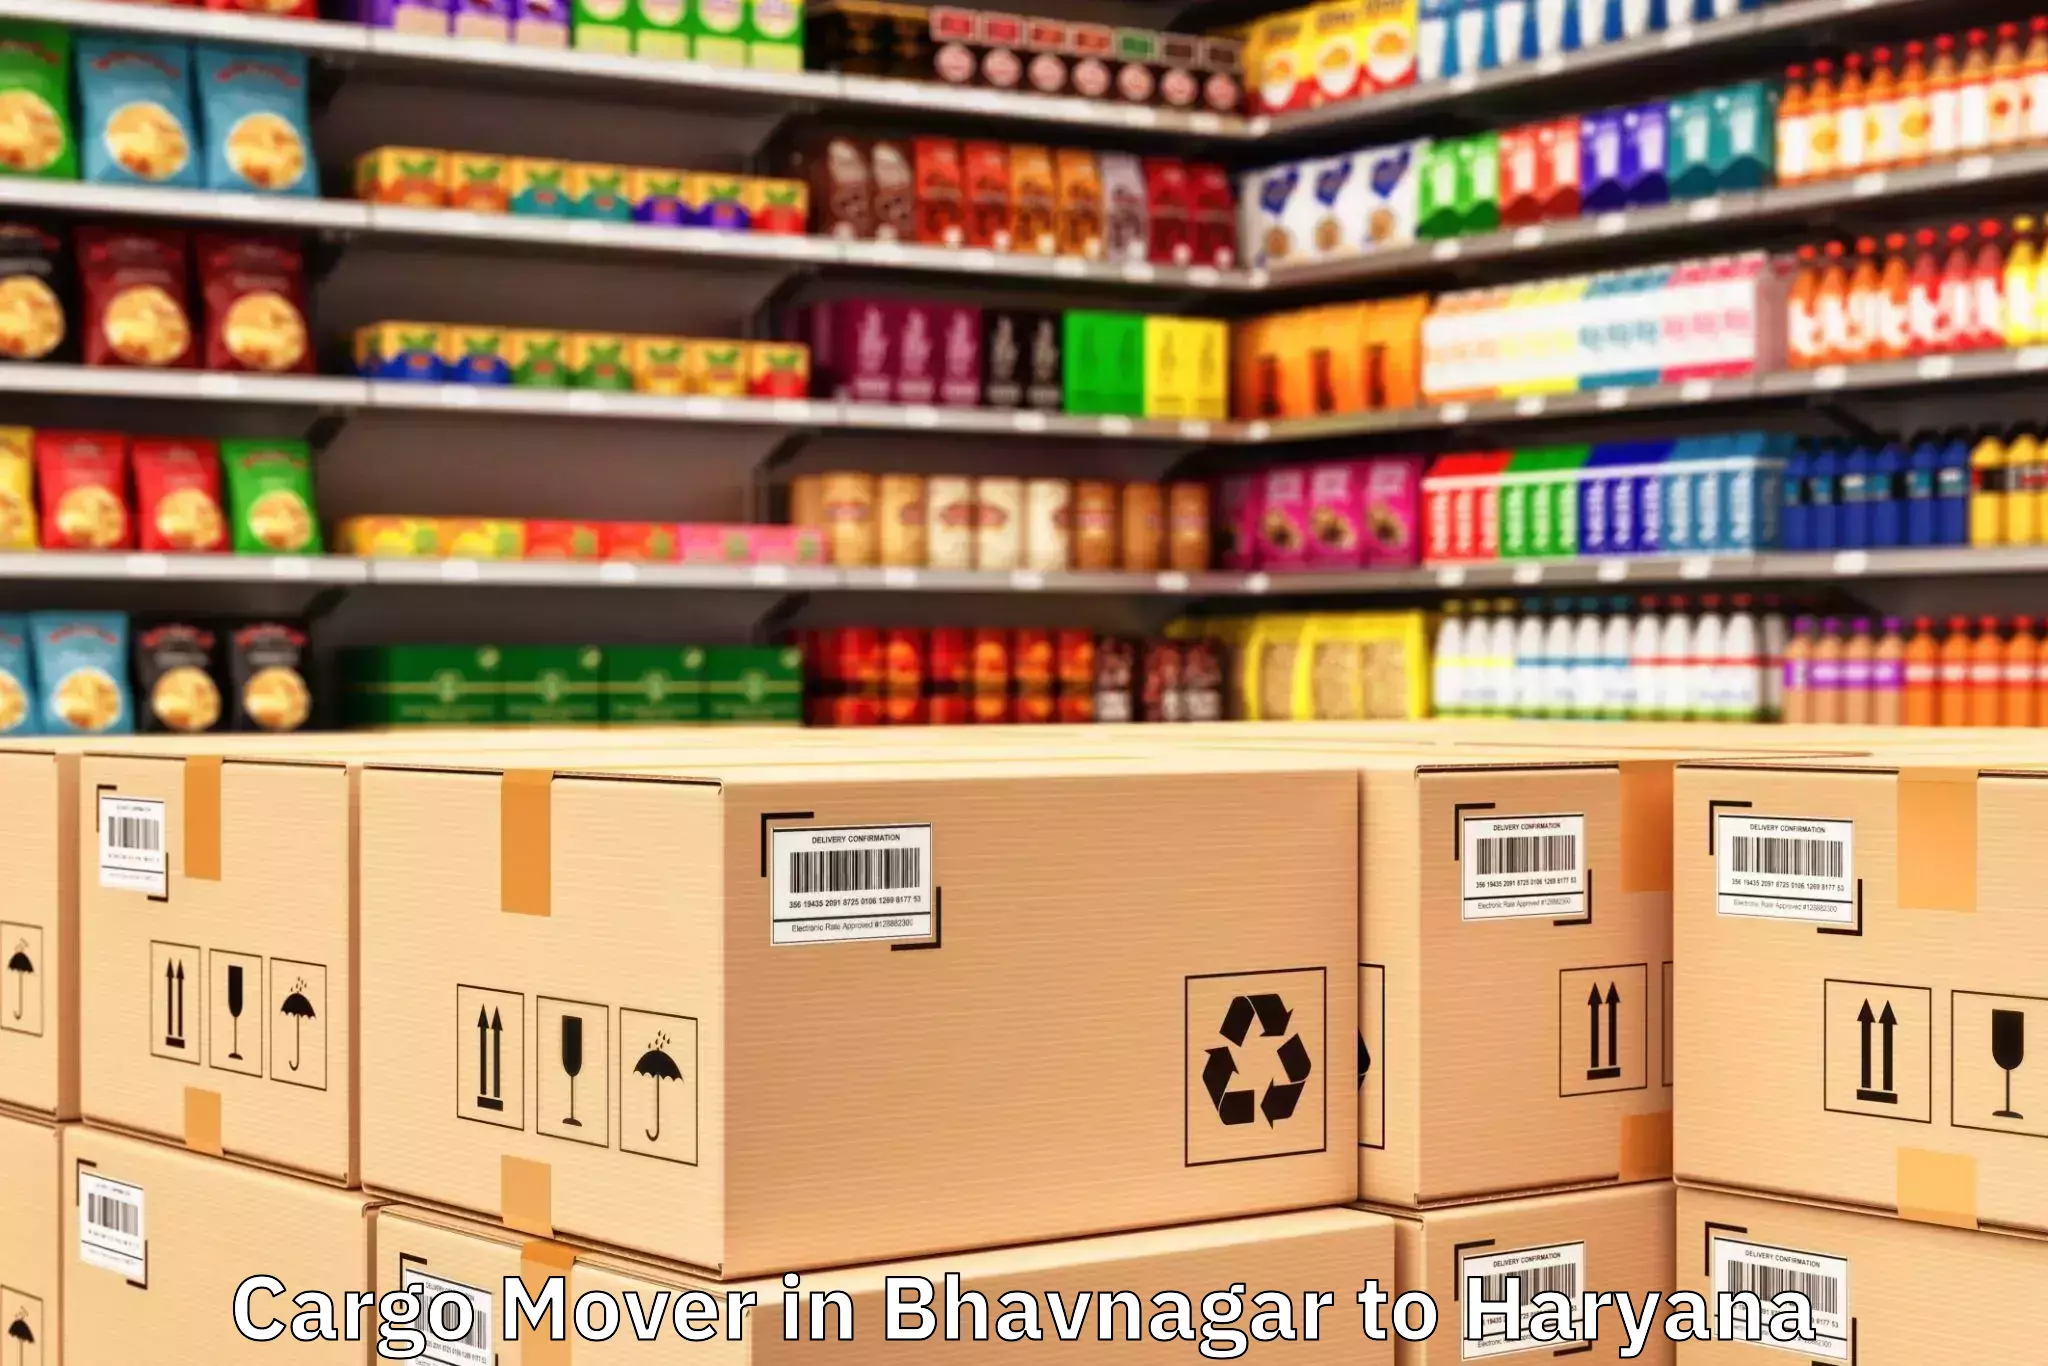 Top Bhavnagar to Dt Mega Mall Cargo Mover Available